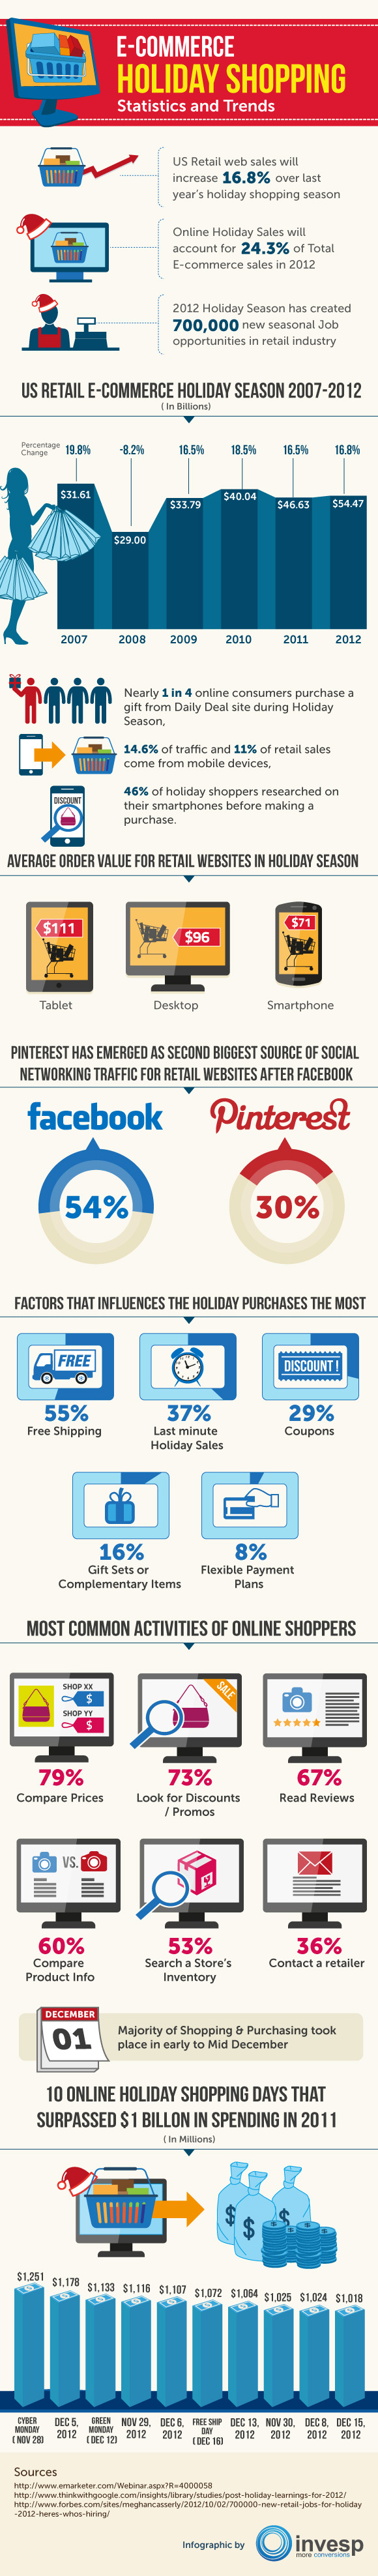 What style of digital shopper are you?